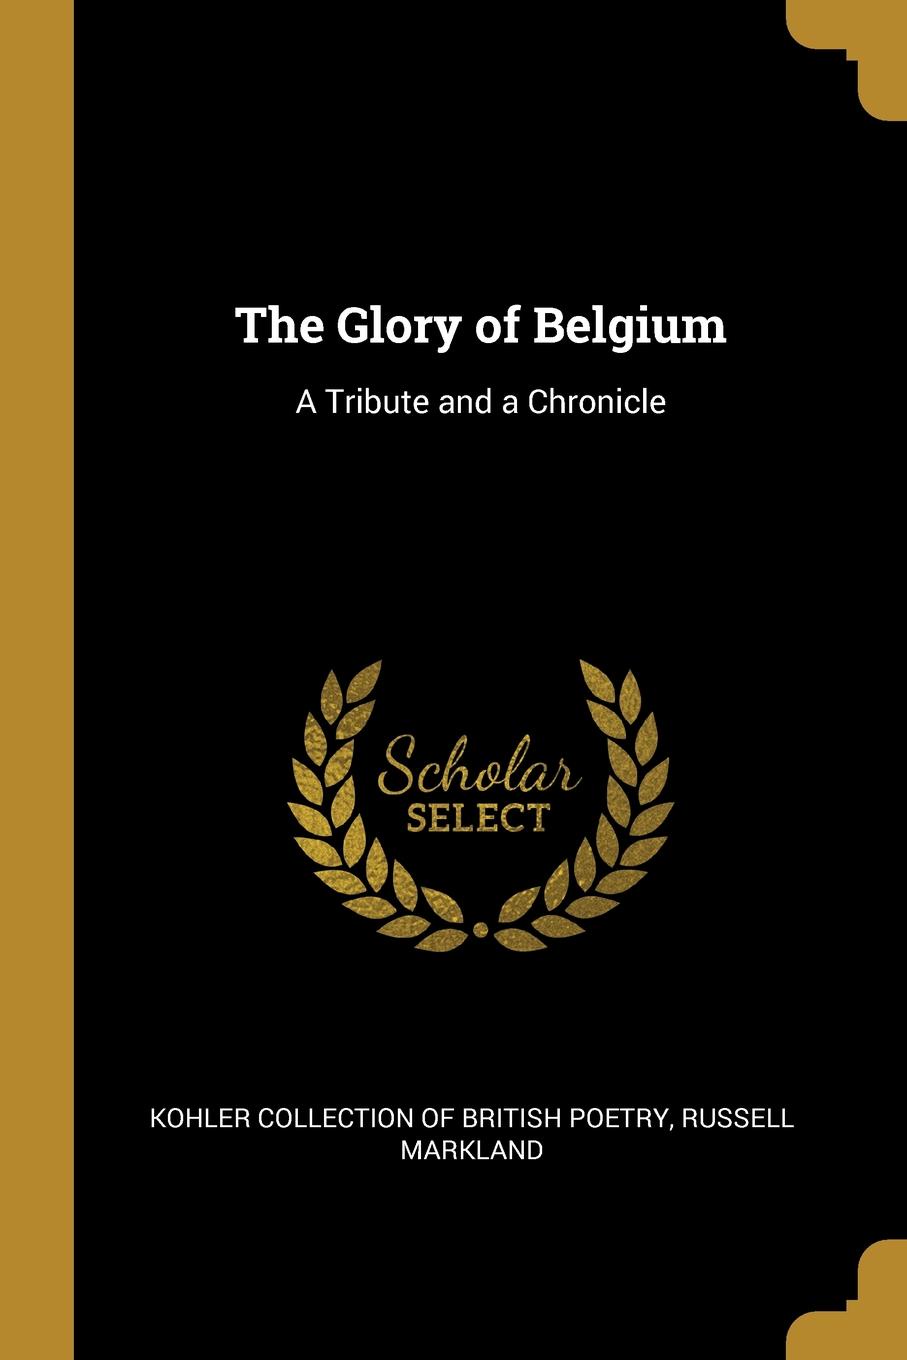 The Glory of Belgium. A Tribute and a Chronicle